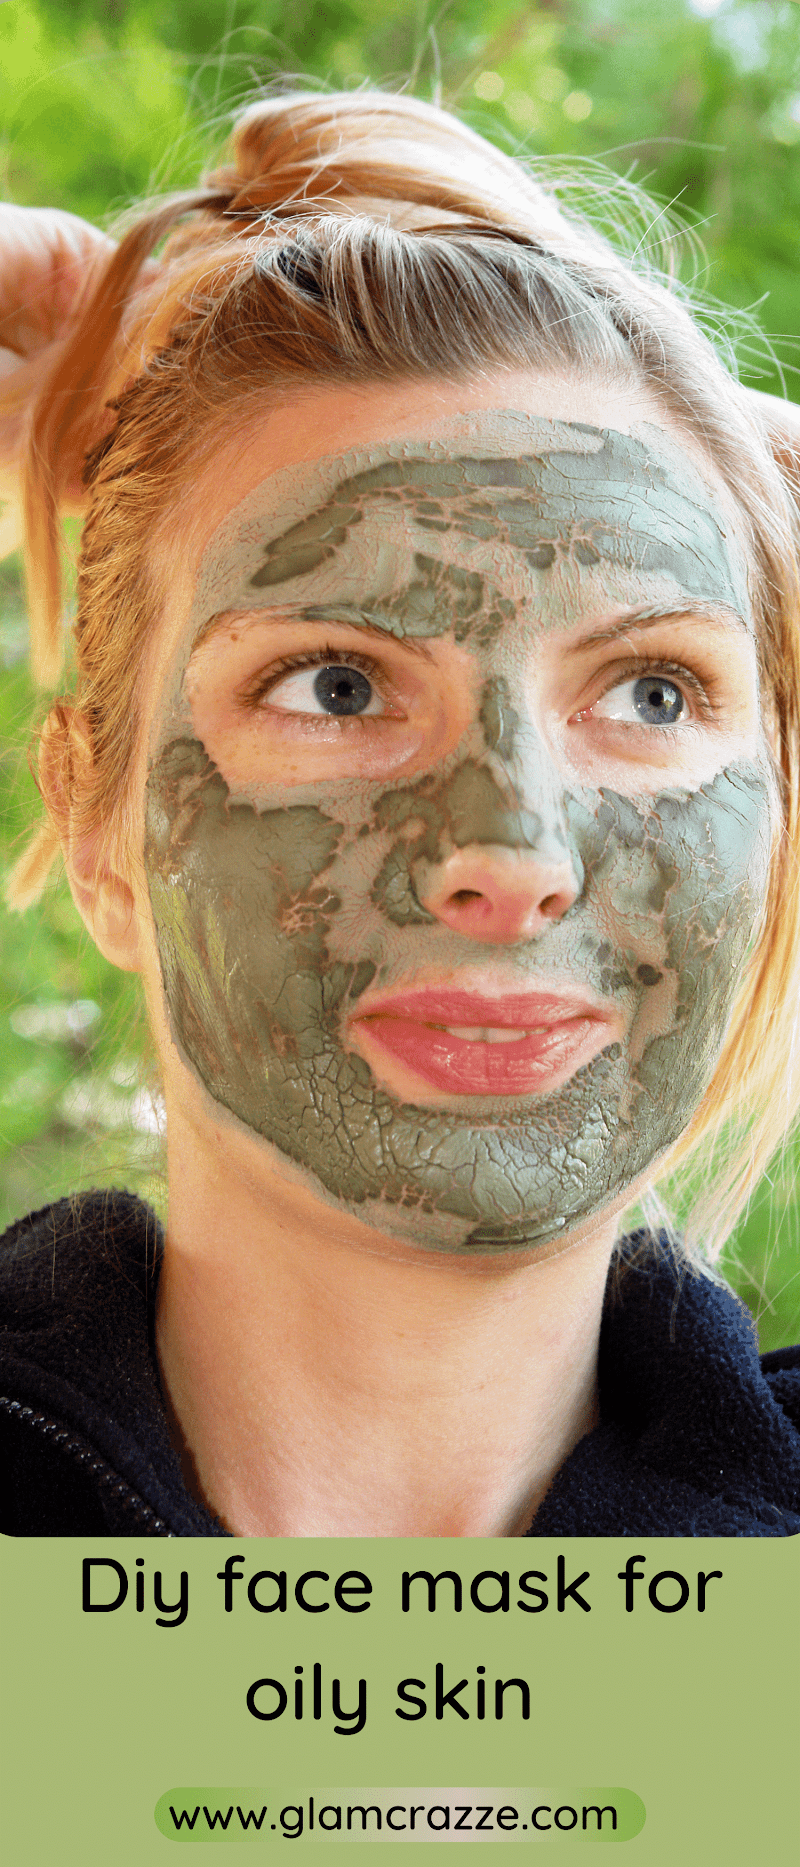 List of 10 different Face mask for oily skin